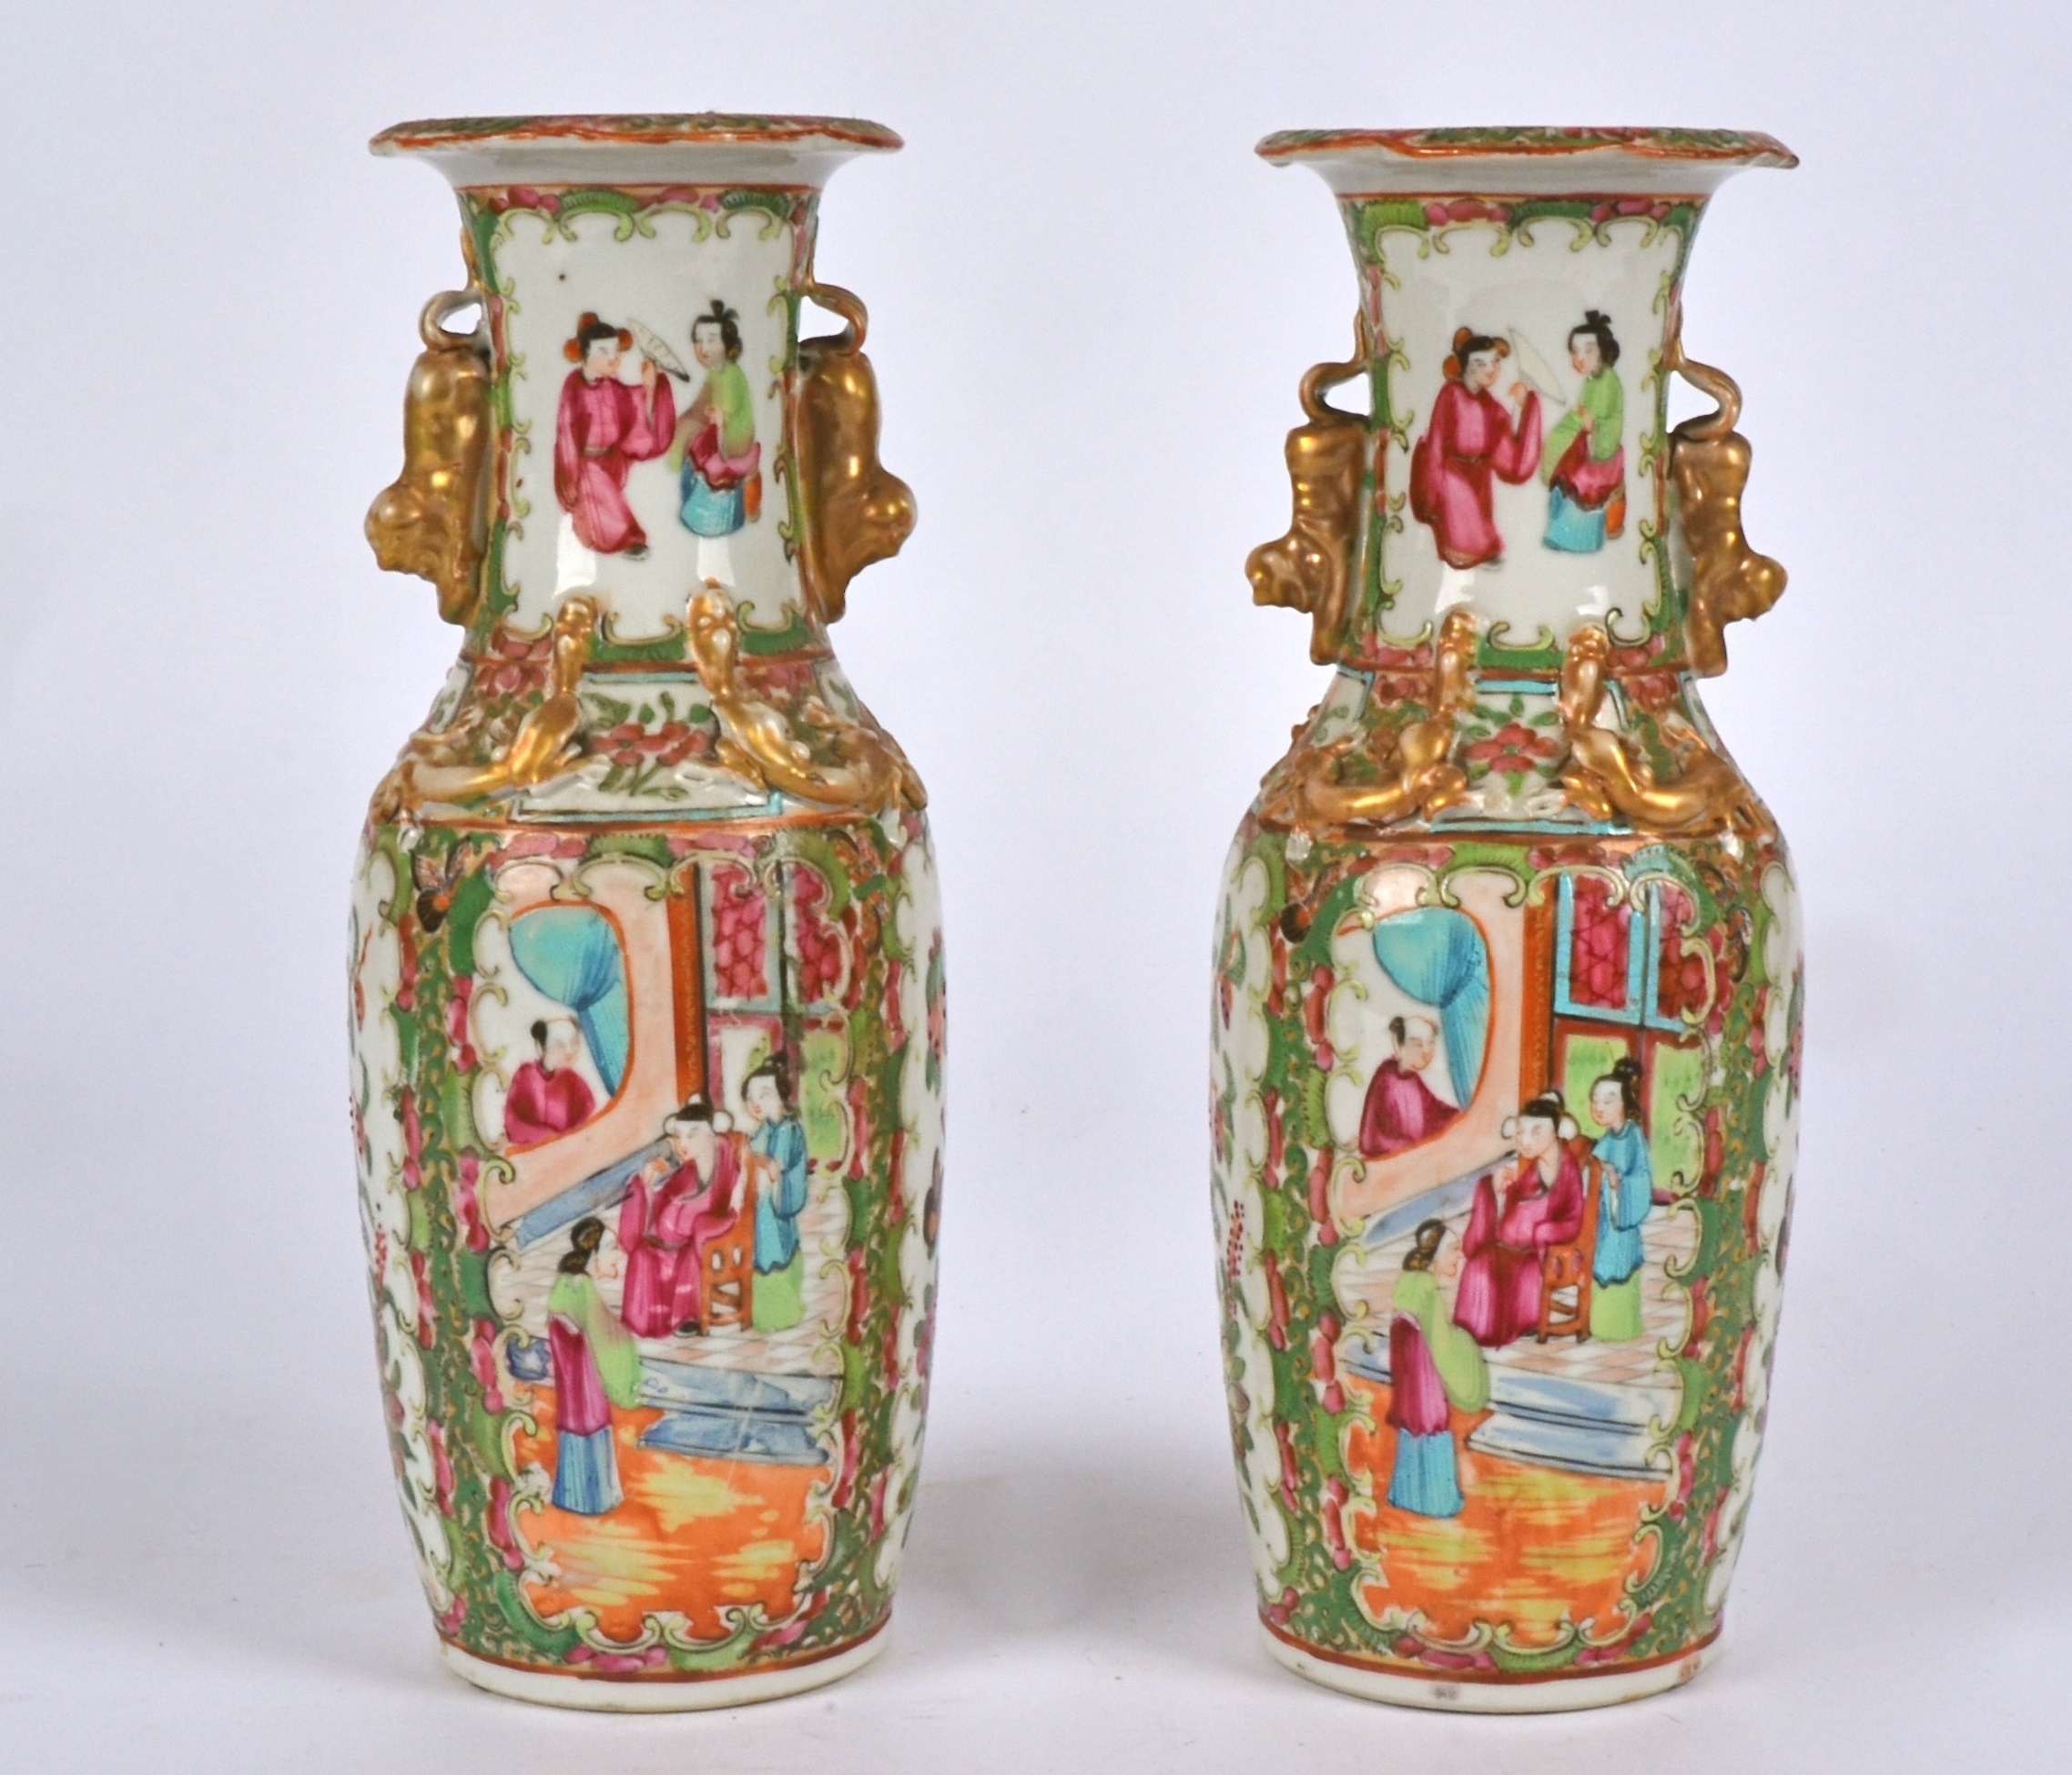 A pair of 19th Century Chinese Canton rose medallion baluster vases, decorated in overglaze